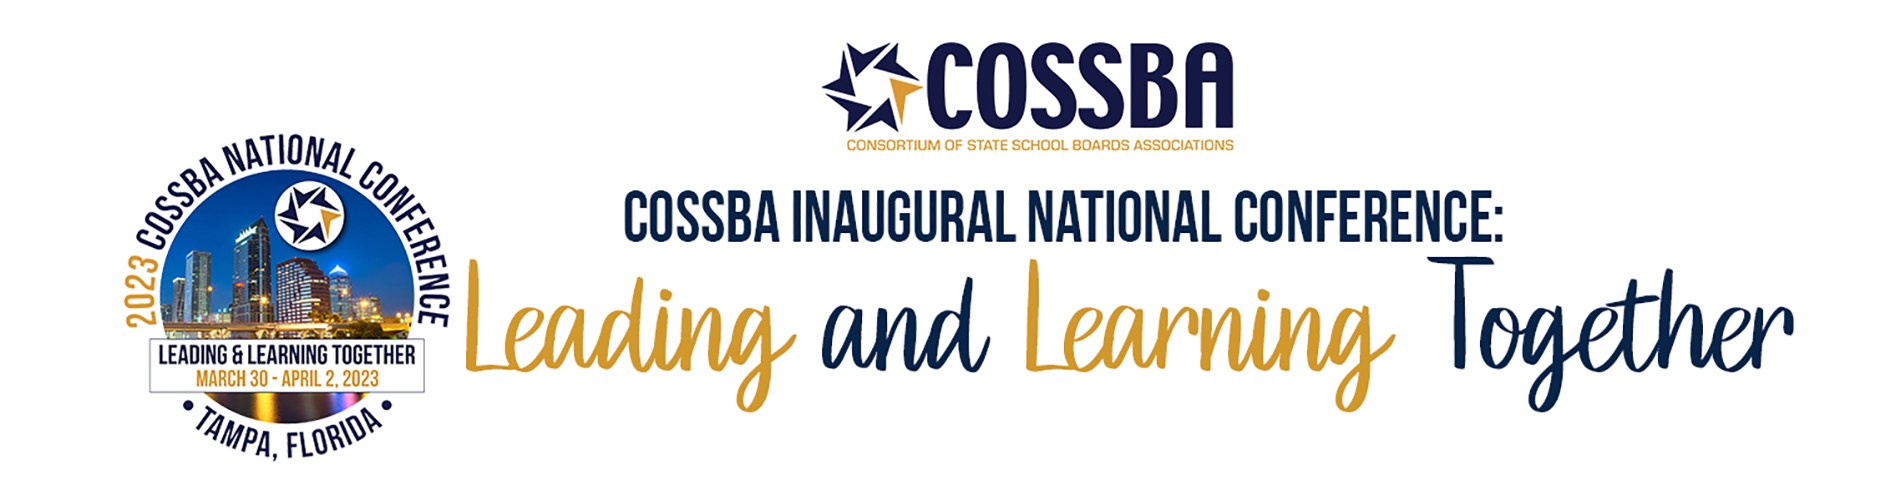 COSSBA 2023 National Conference